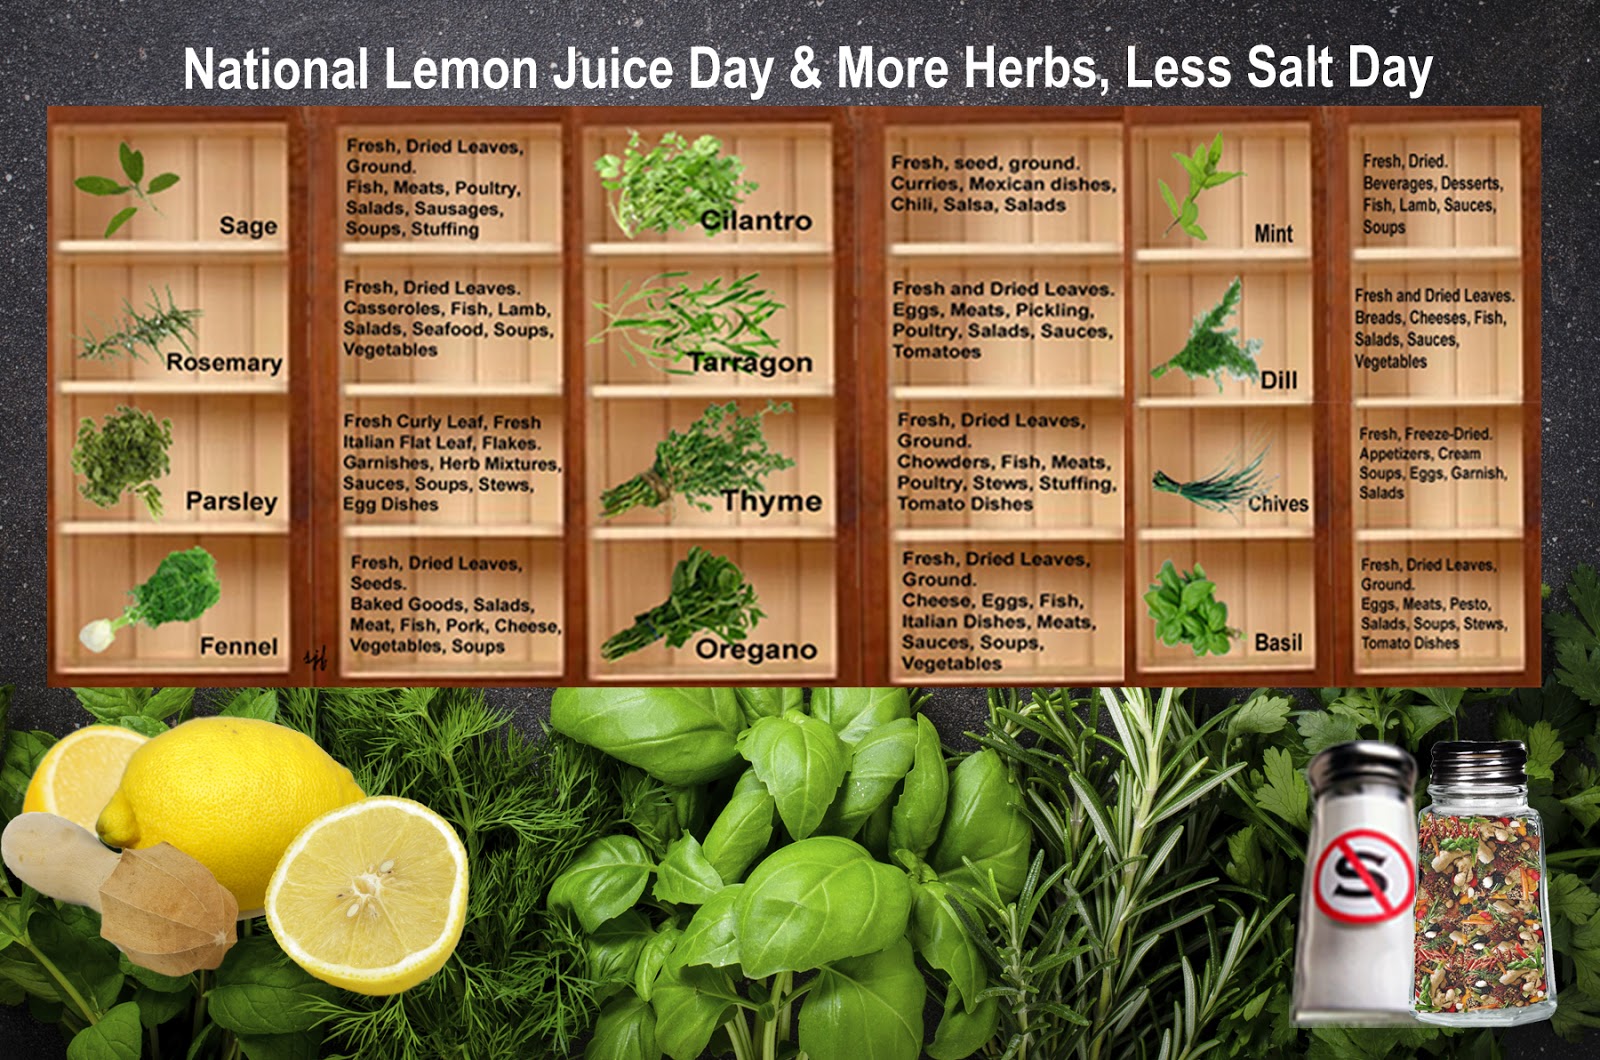 Dietitians Online Blog: August 29, More Herbs, Less Salt Day and